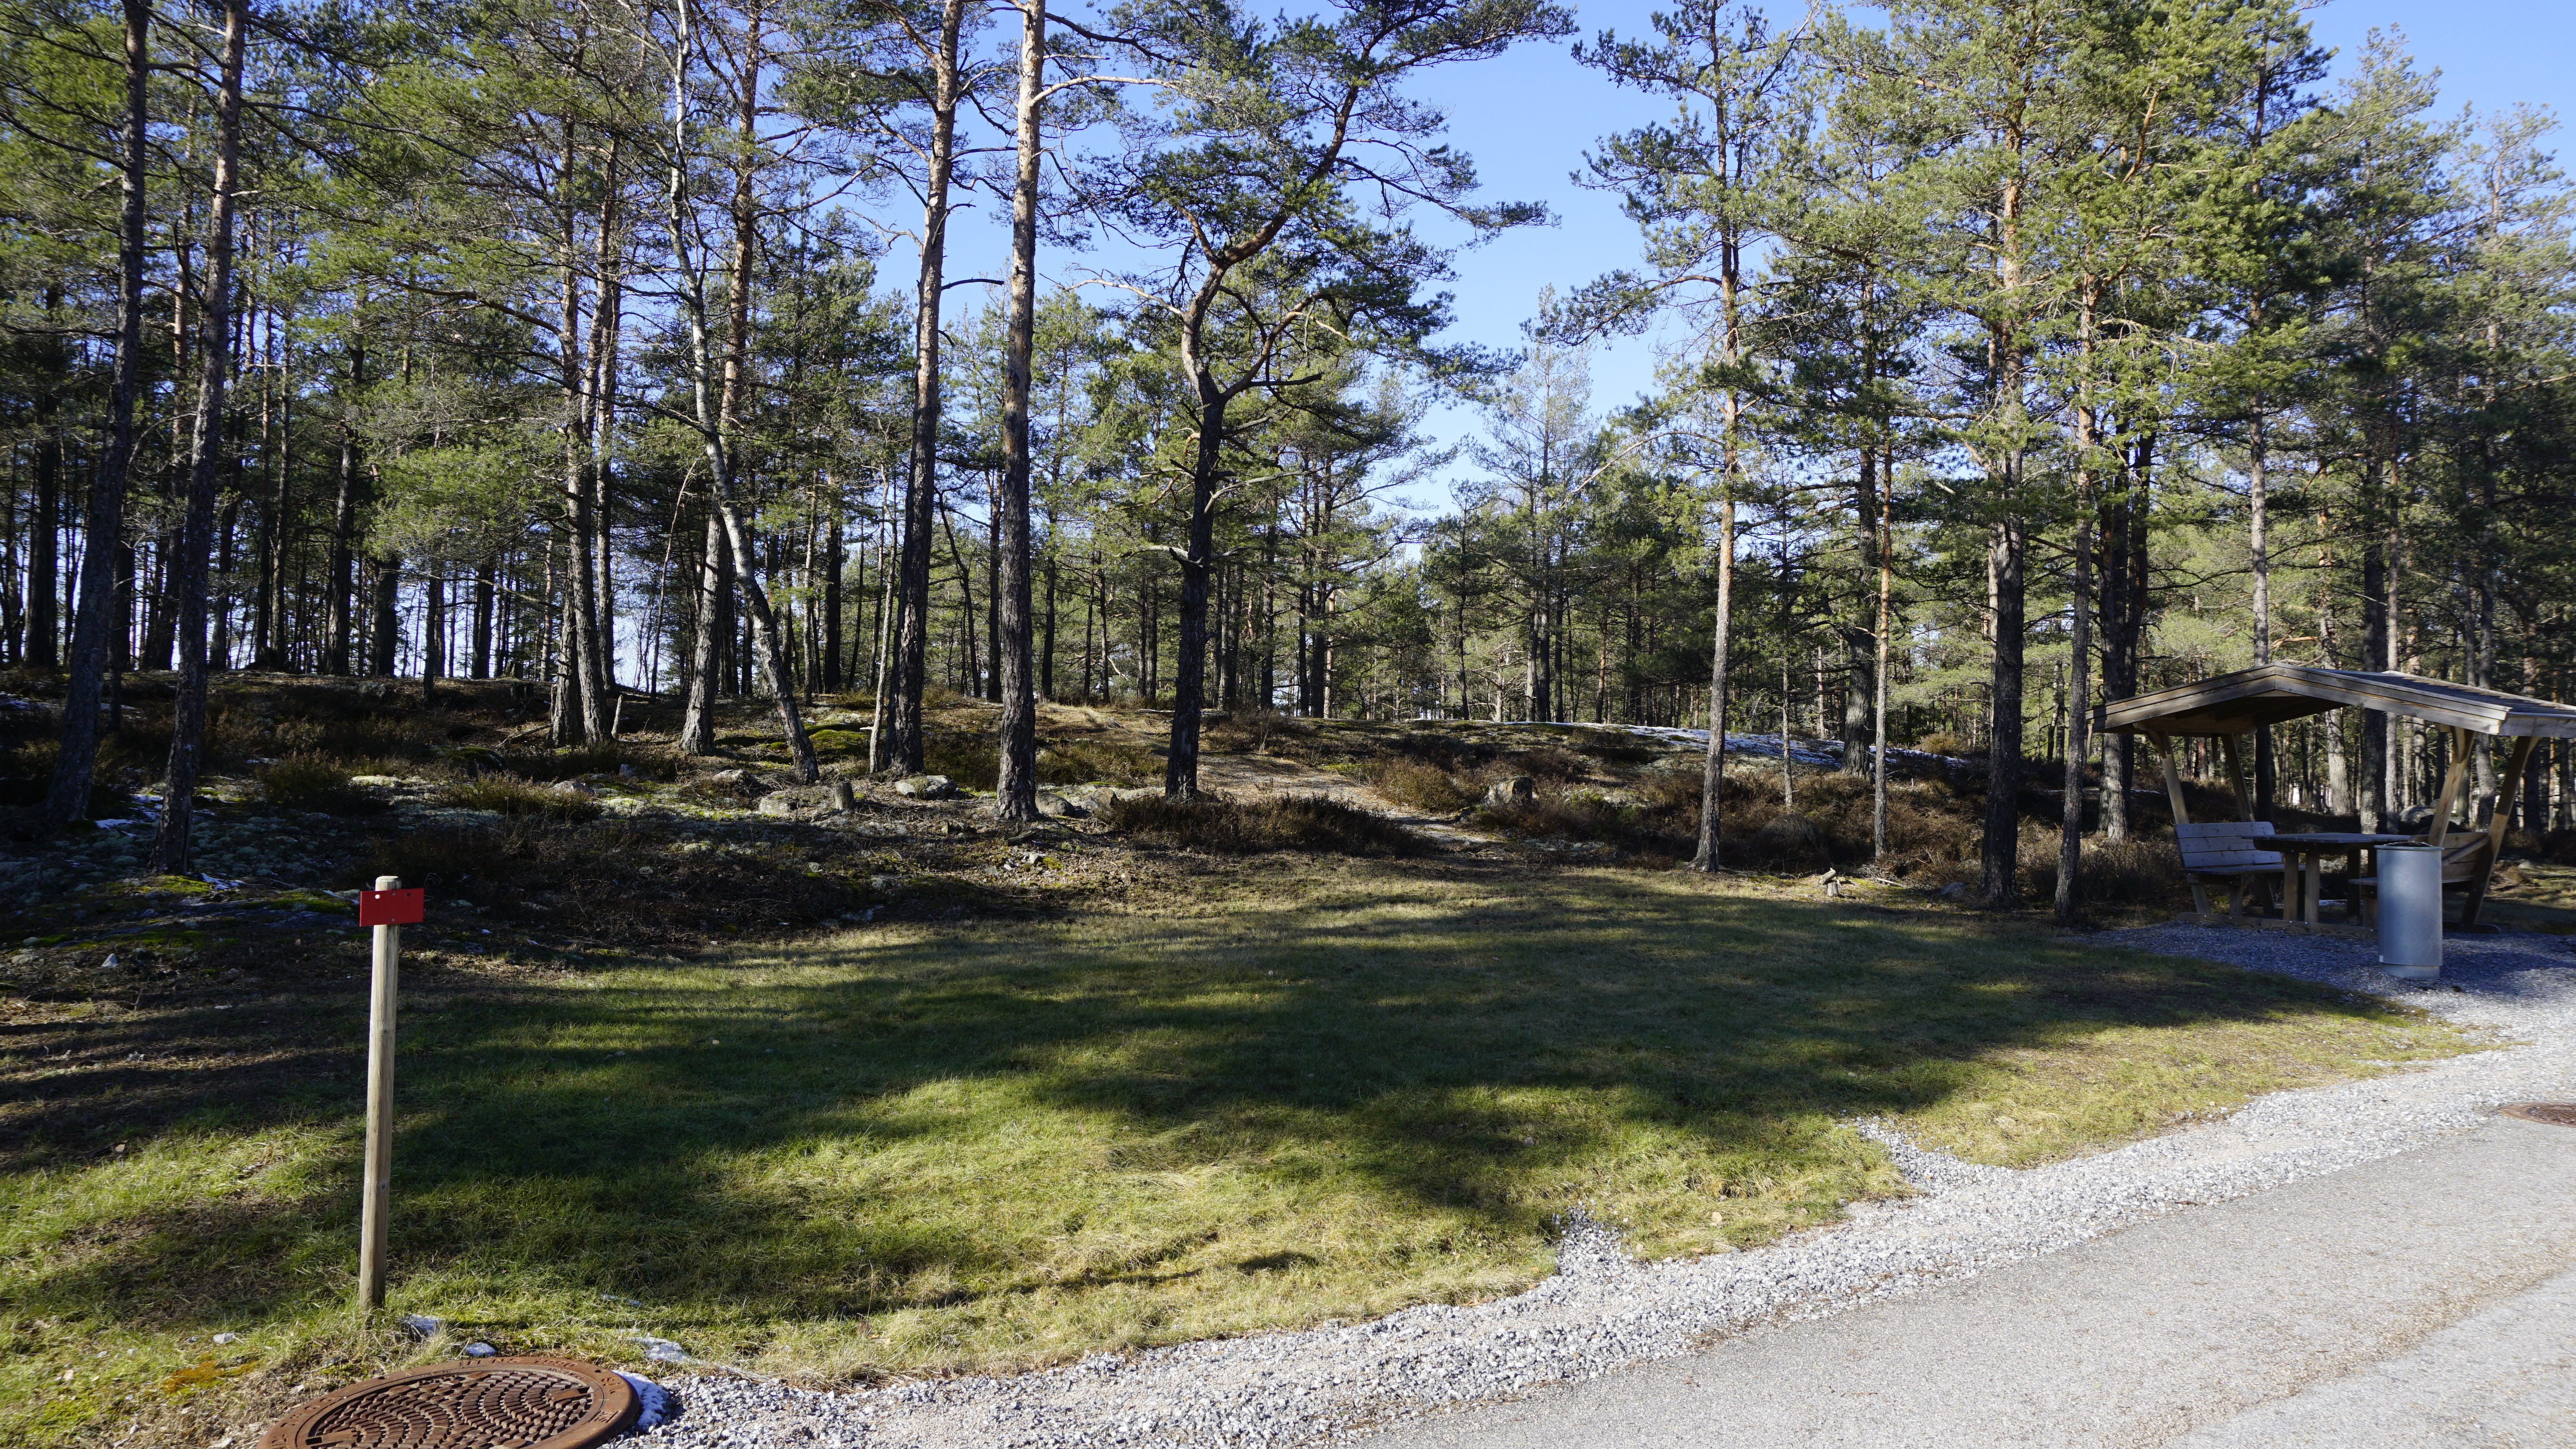 Daily life at Norway's Halden Prison includes frequent walks between housing units, classroom buildings and other areas along tree-lined paths such as this.